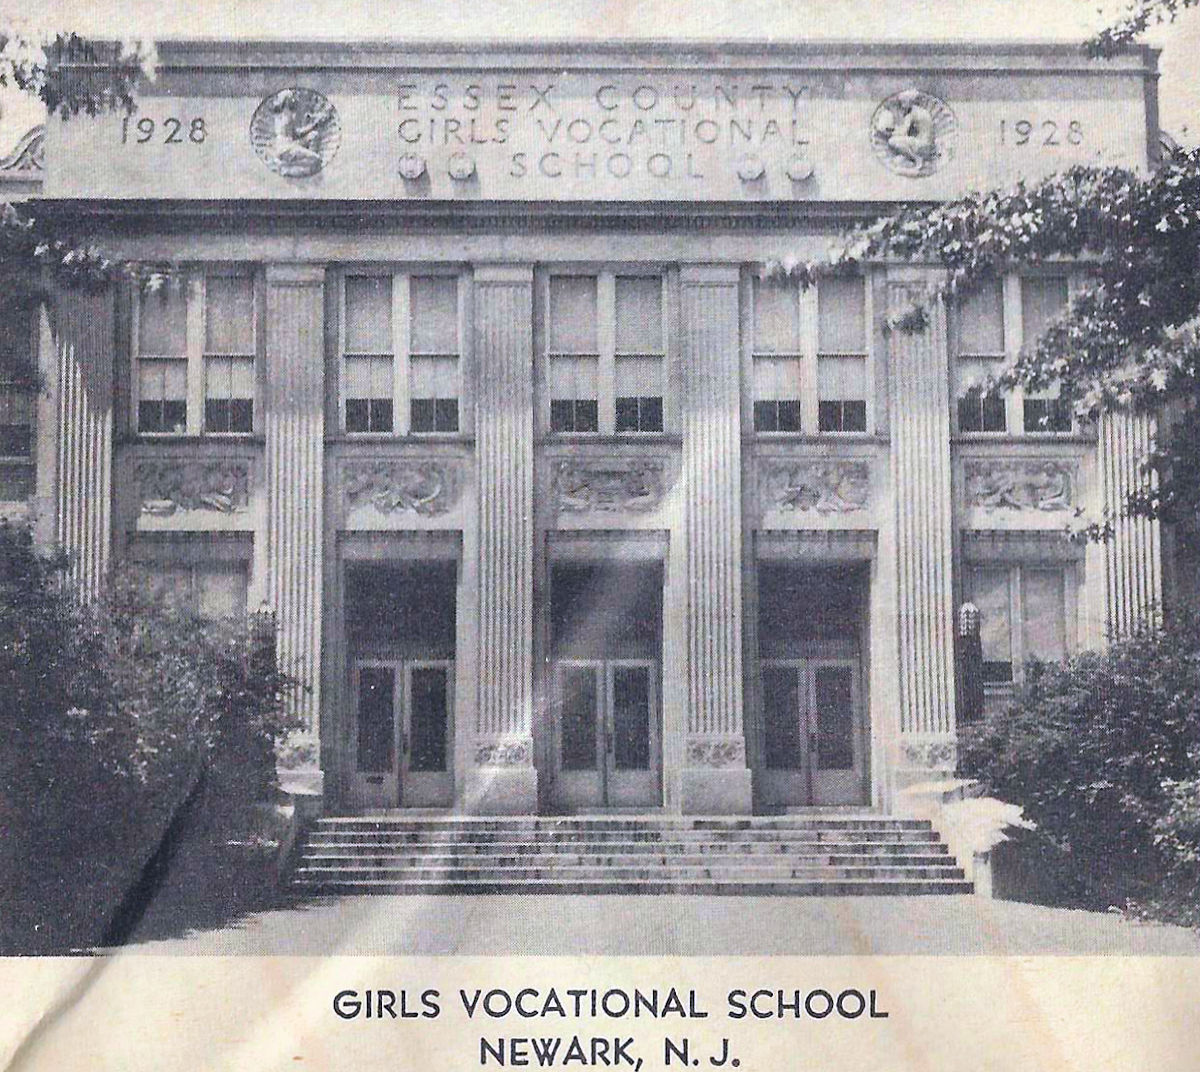 300 North Thirteenth Street
Girls Vocational School
Photo from Street & Road Map of Essex County 1953
